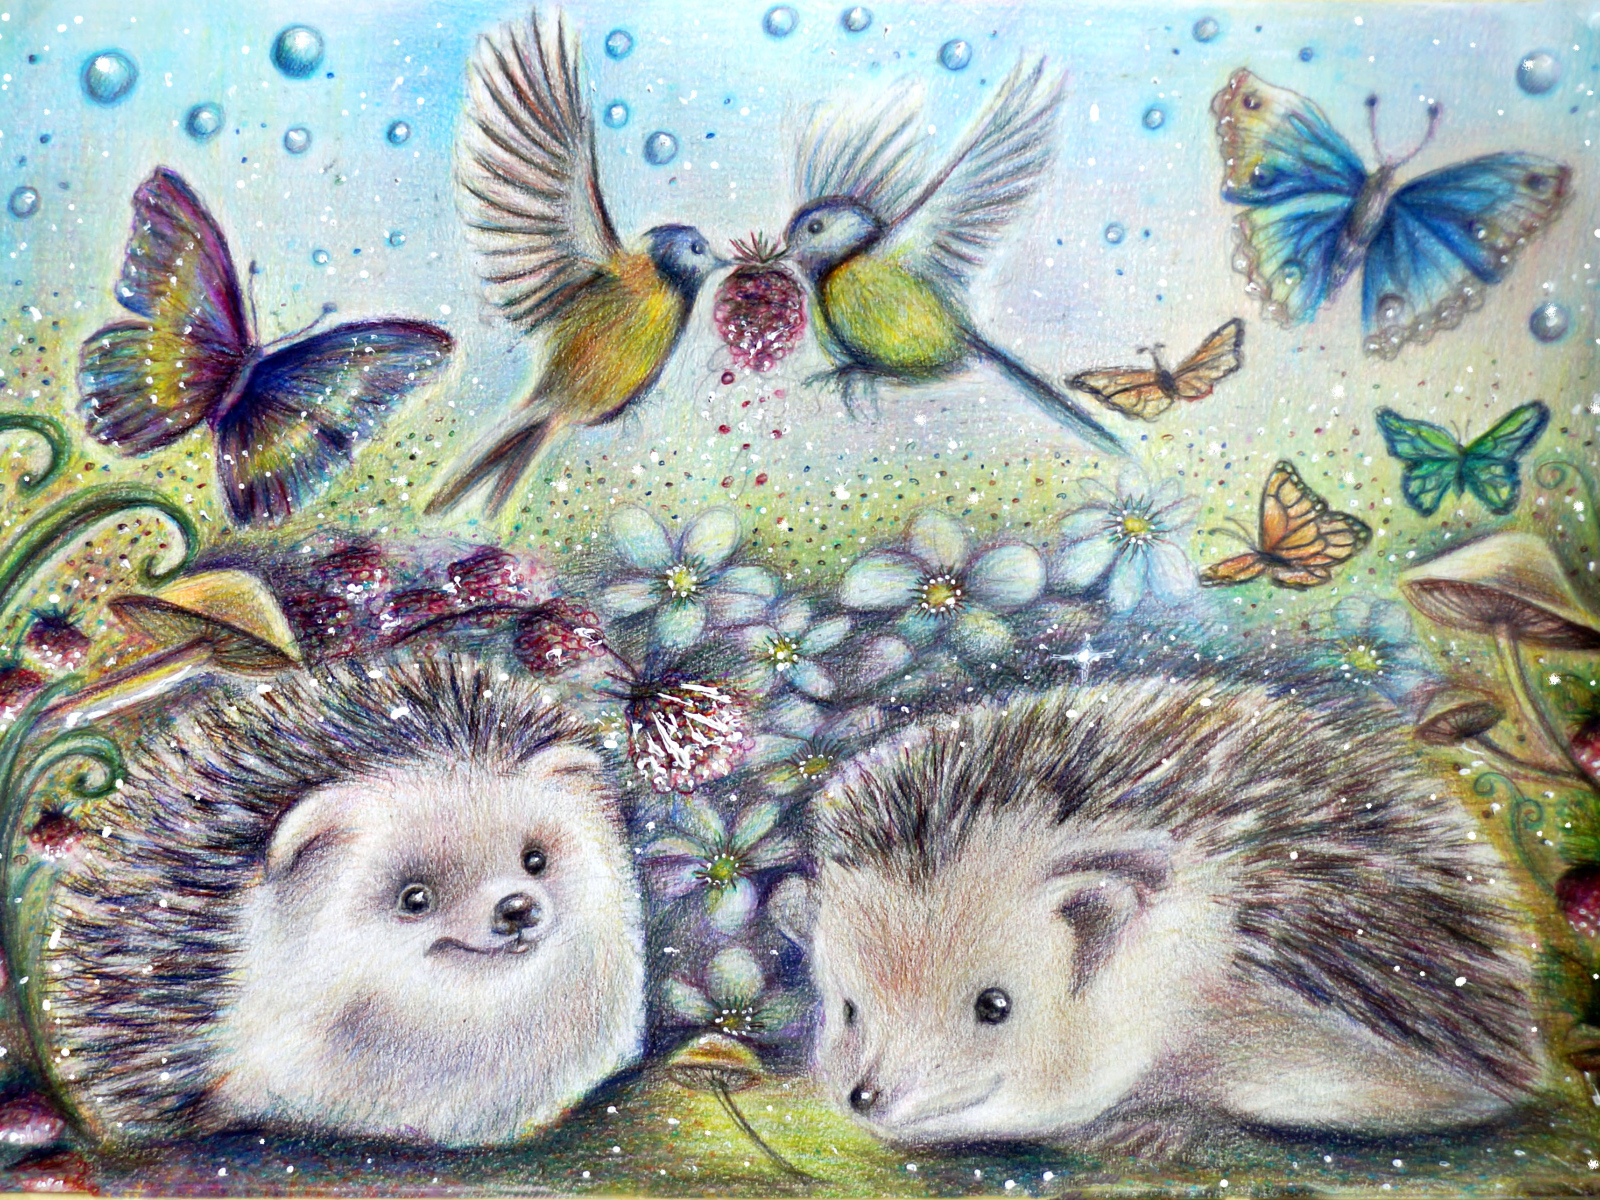 Drawn hedgehogs with butterflies and birds